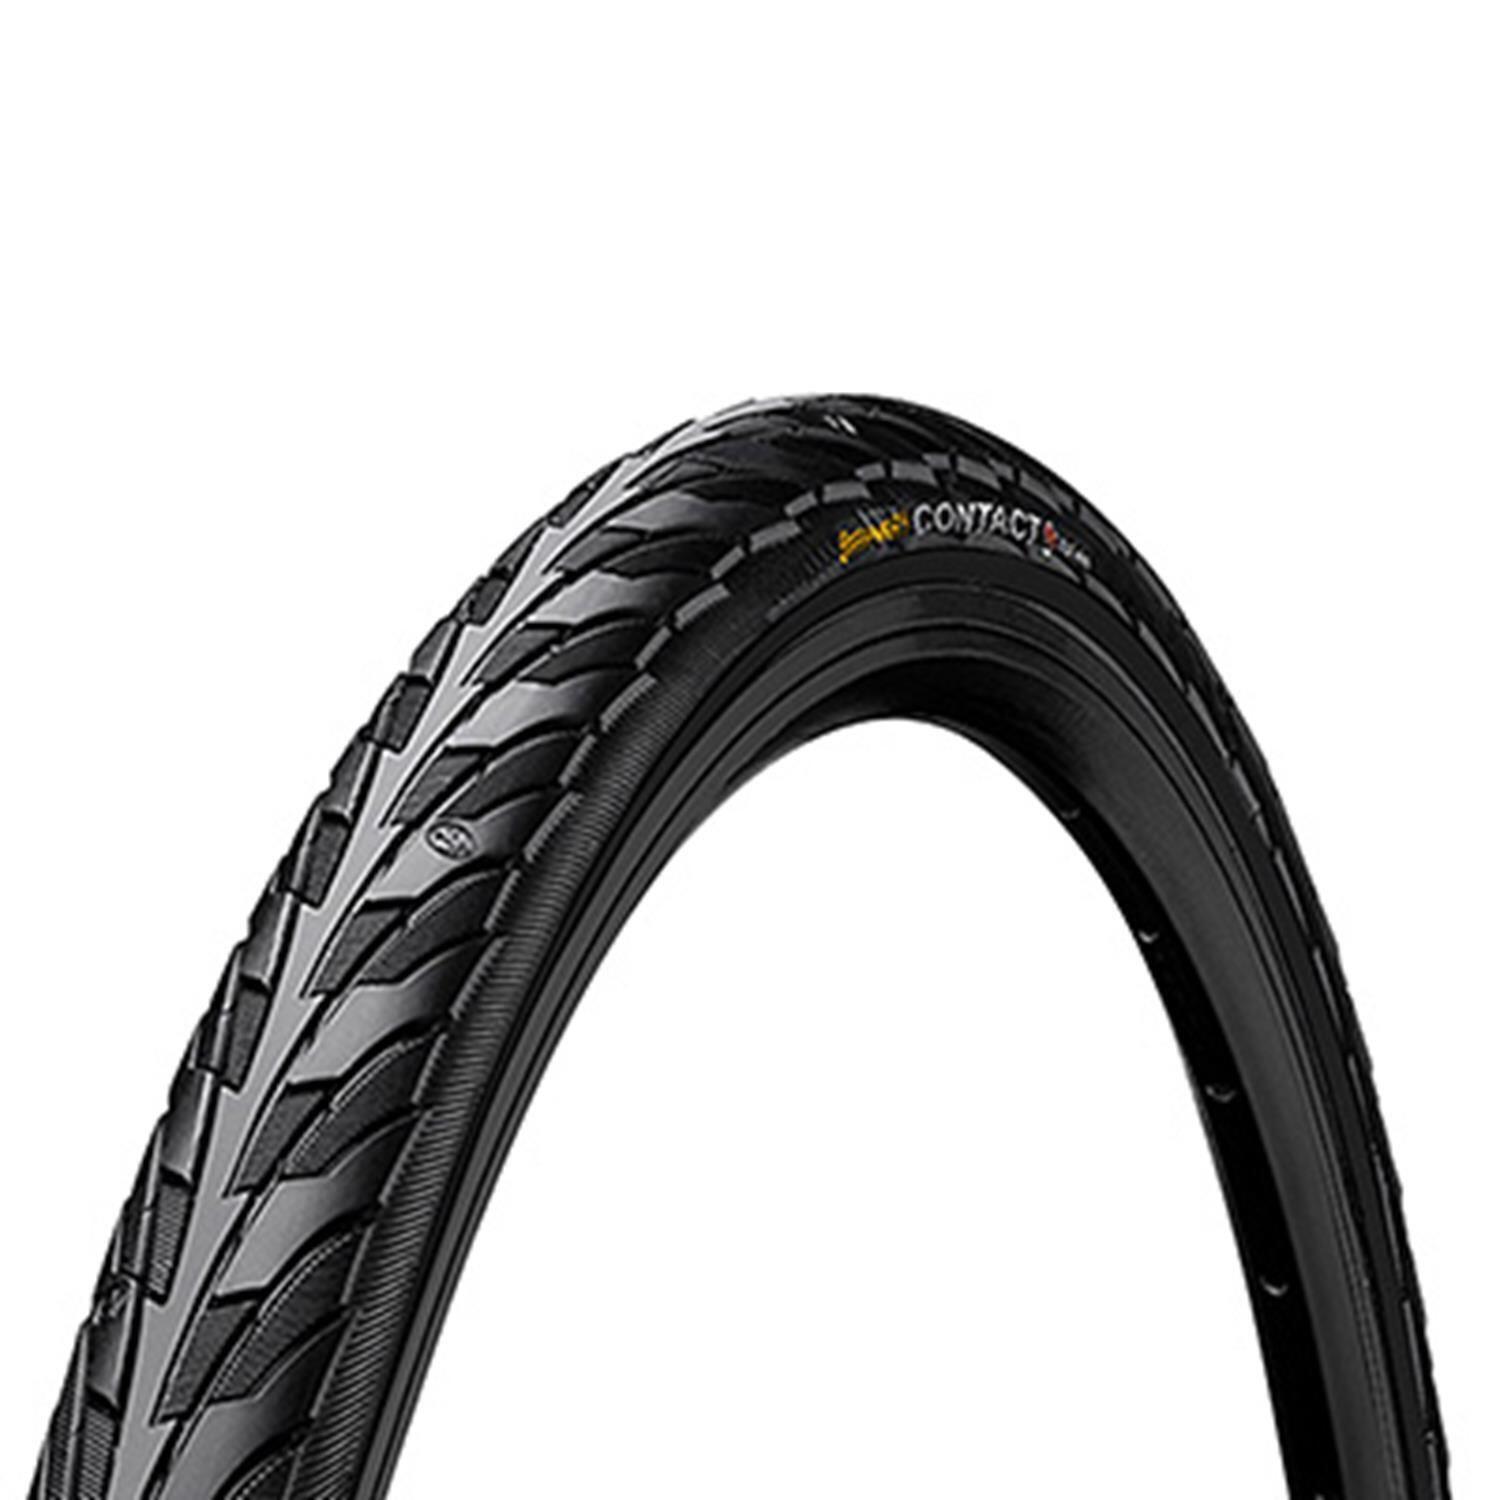 CONTINENTAL CONTACT Tyre-Wire Bead Urban Black/Black 26 X 1.75 Puncture Protection